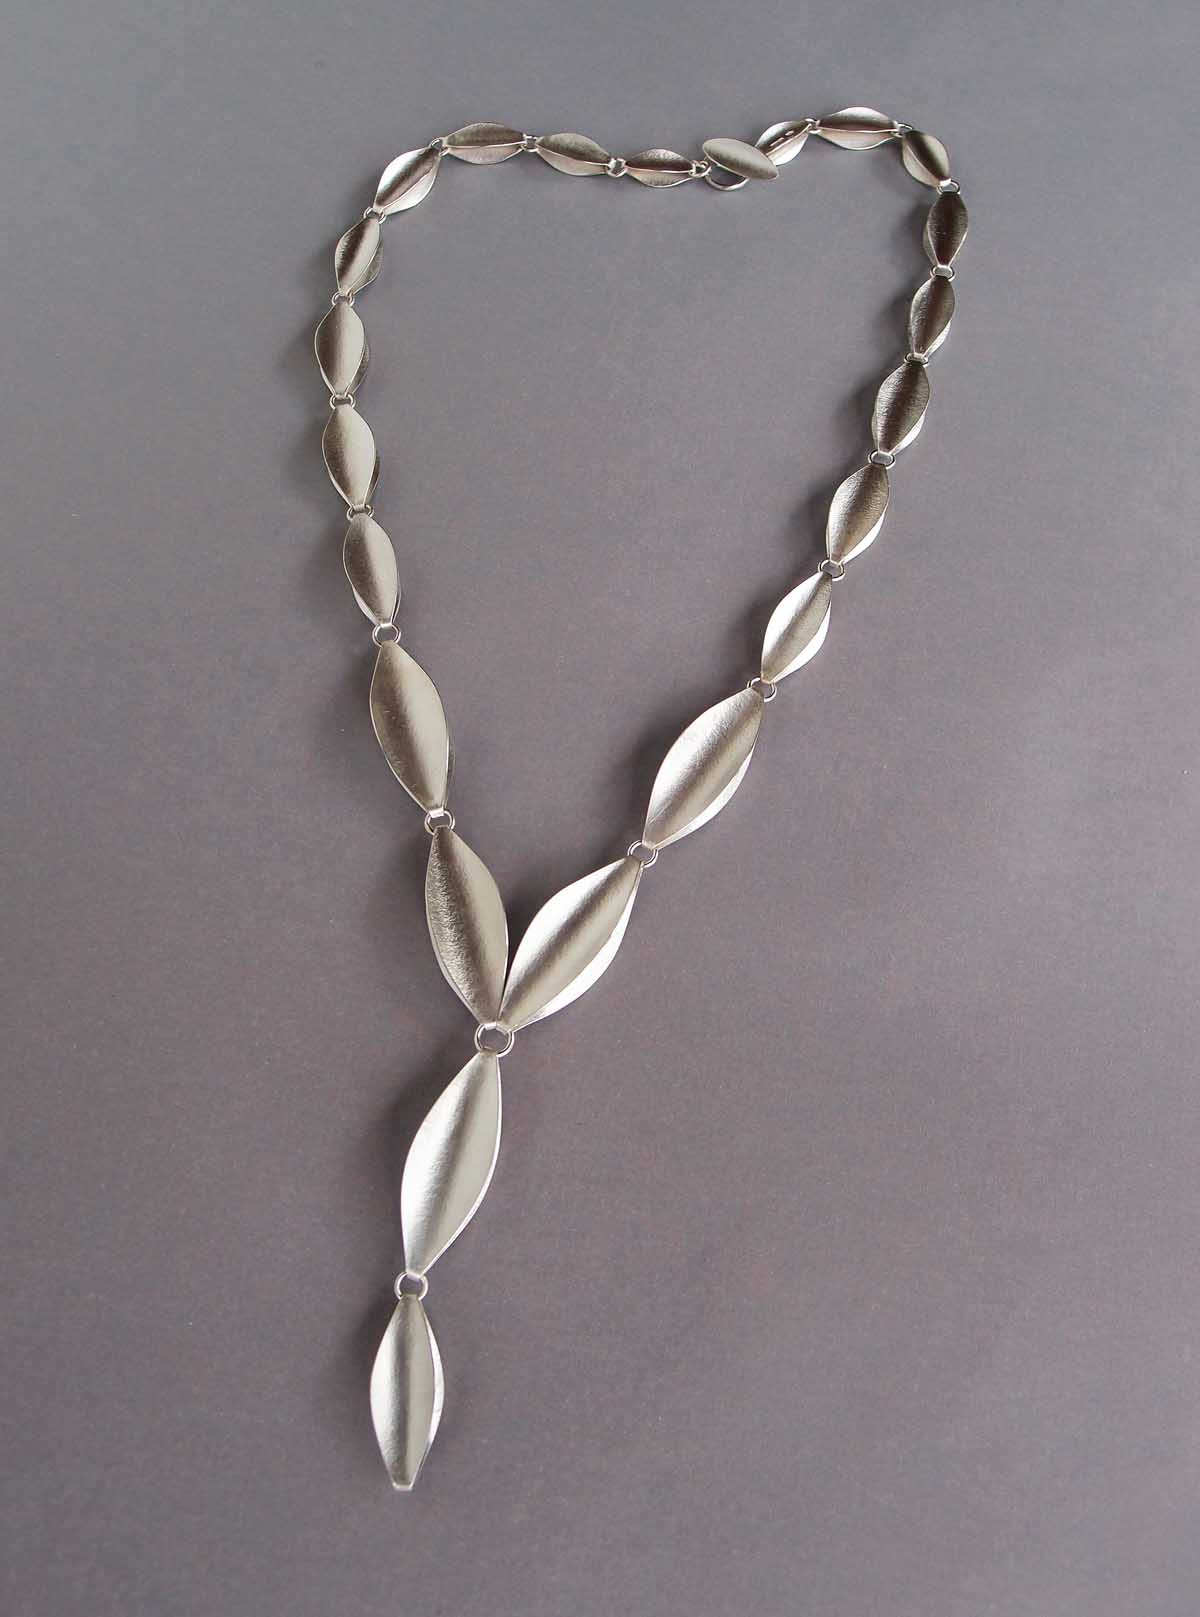 Silver shuttle necklace